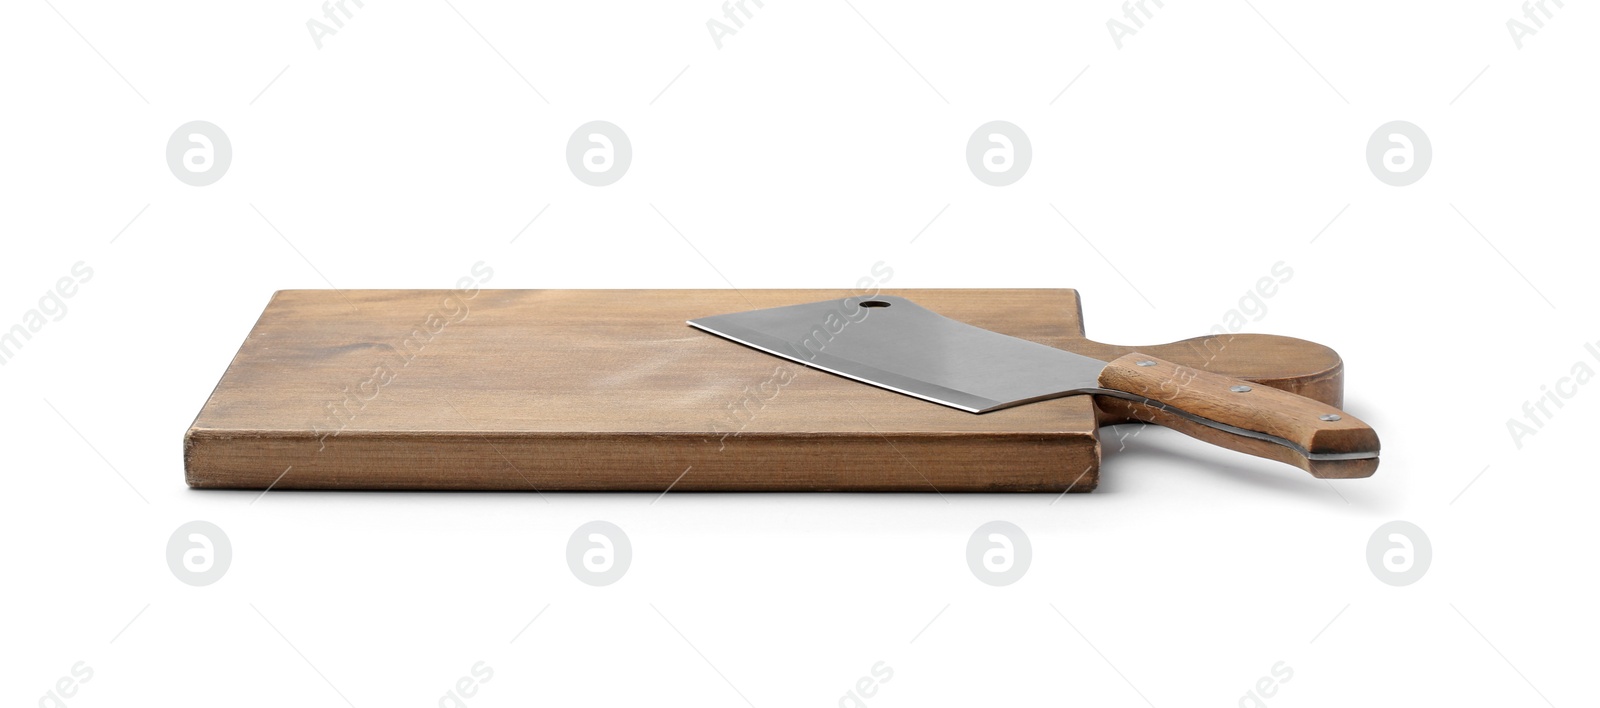 Photo of Stainless steel cleaver knife with wooden handle on board against white background